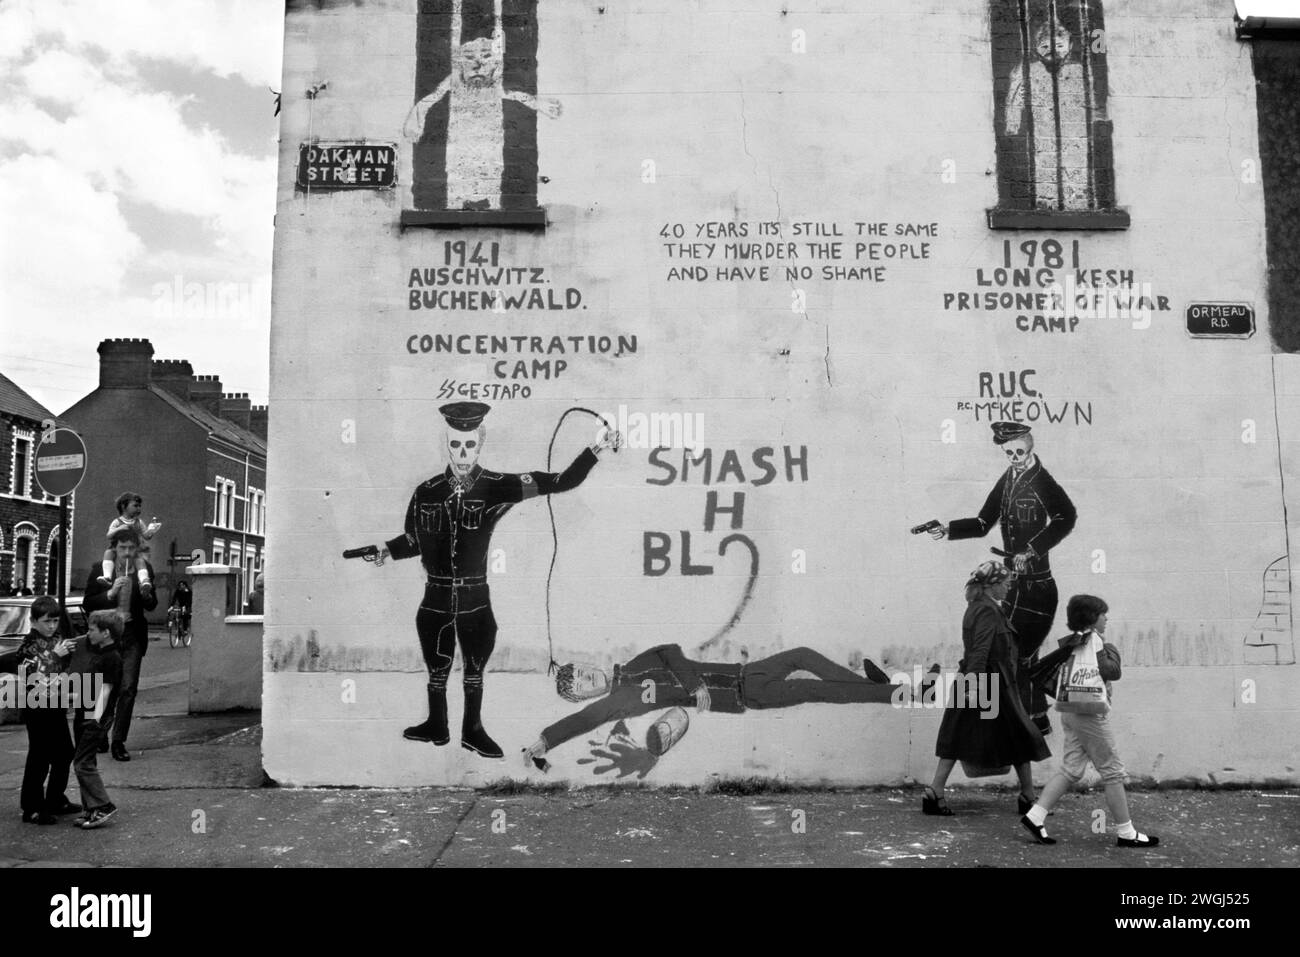 Ireland The Troubles. Belfast Catholic political wall painting. Remembering the Long Kesh internment camp where many for IRA supporters were held. 1981 1980s. UK HOMER SYKES Stock Photo